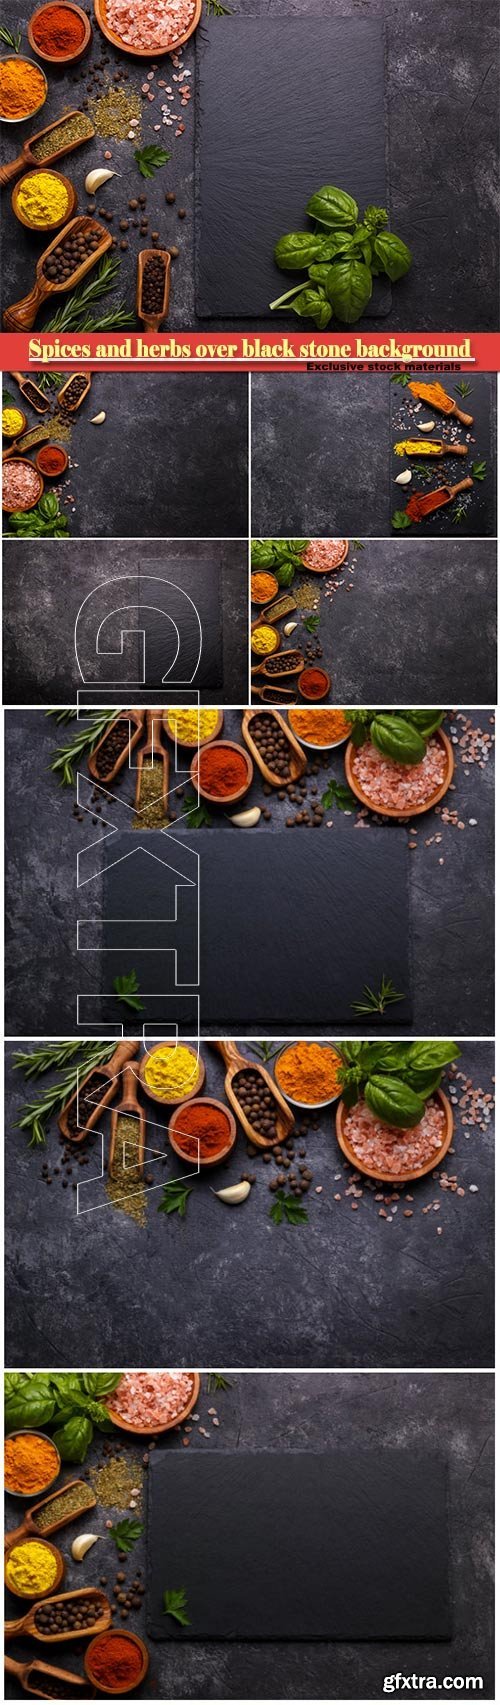 Spices and herbs over black stone background, top view with free space for menu or recipes